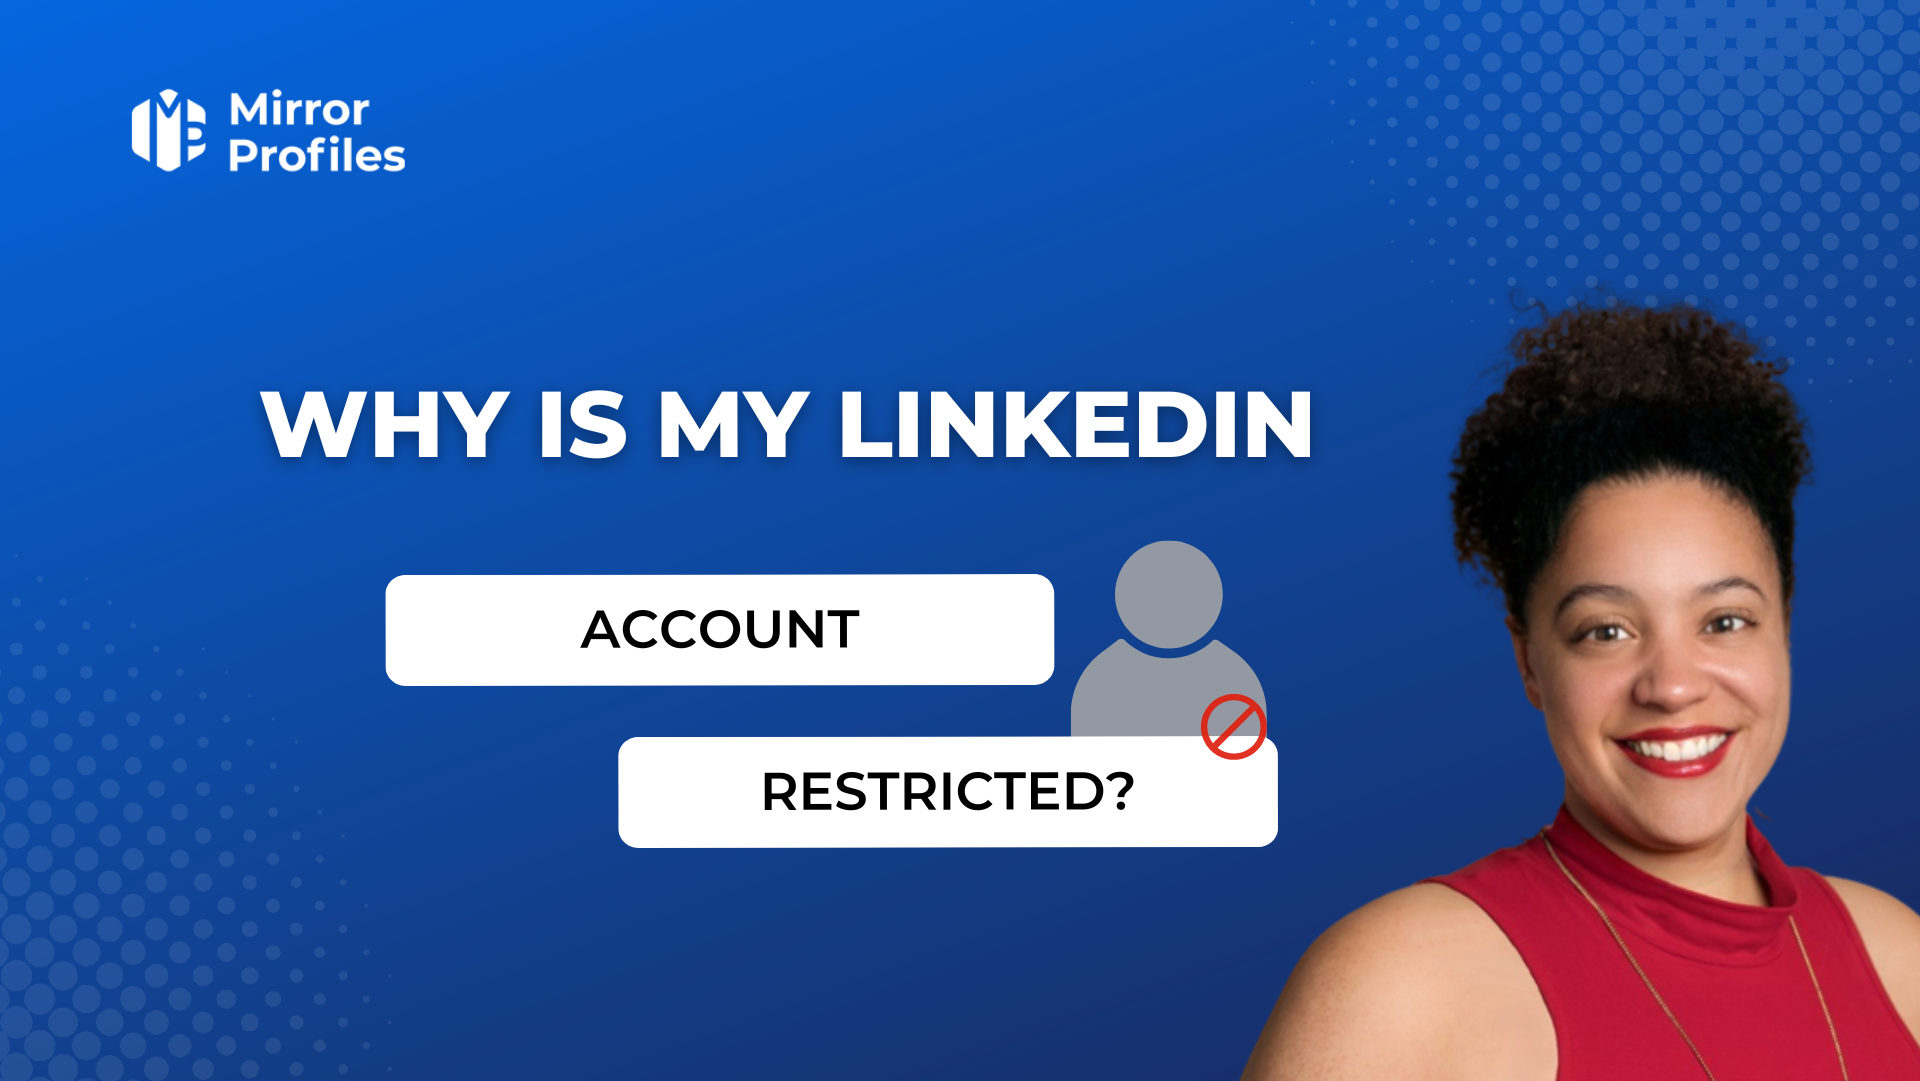 Why is my LinkedIn account restricted?